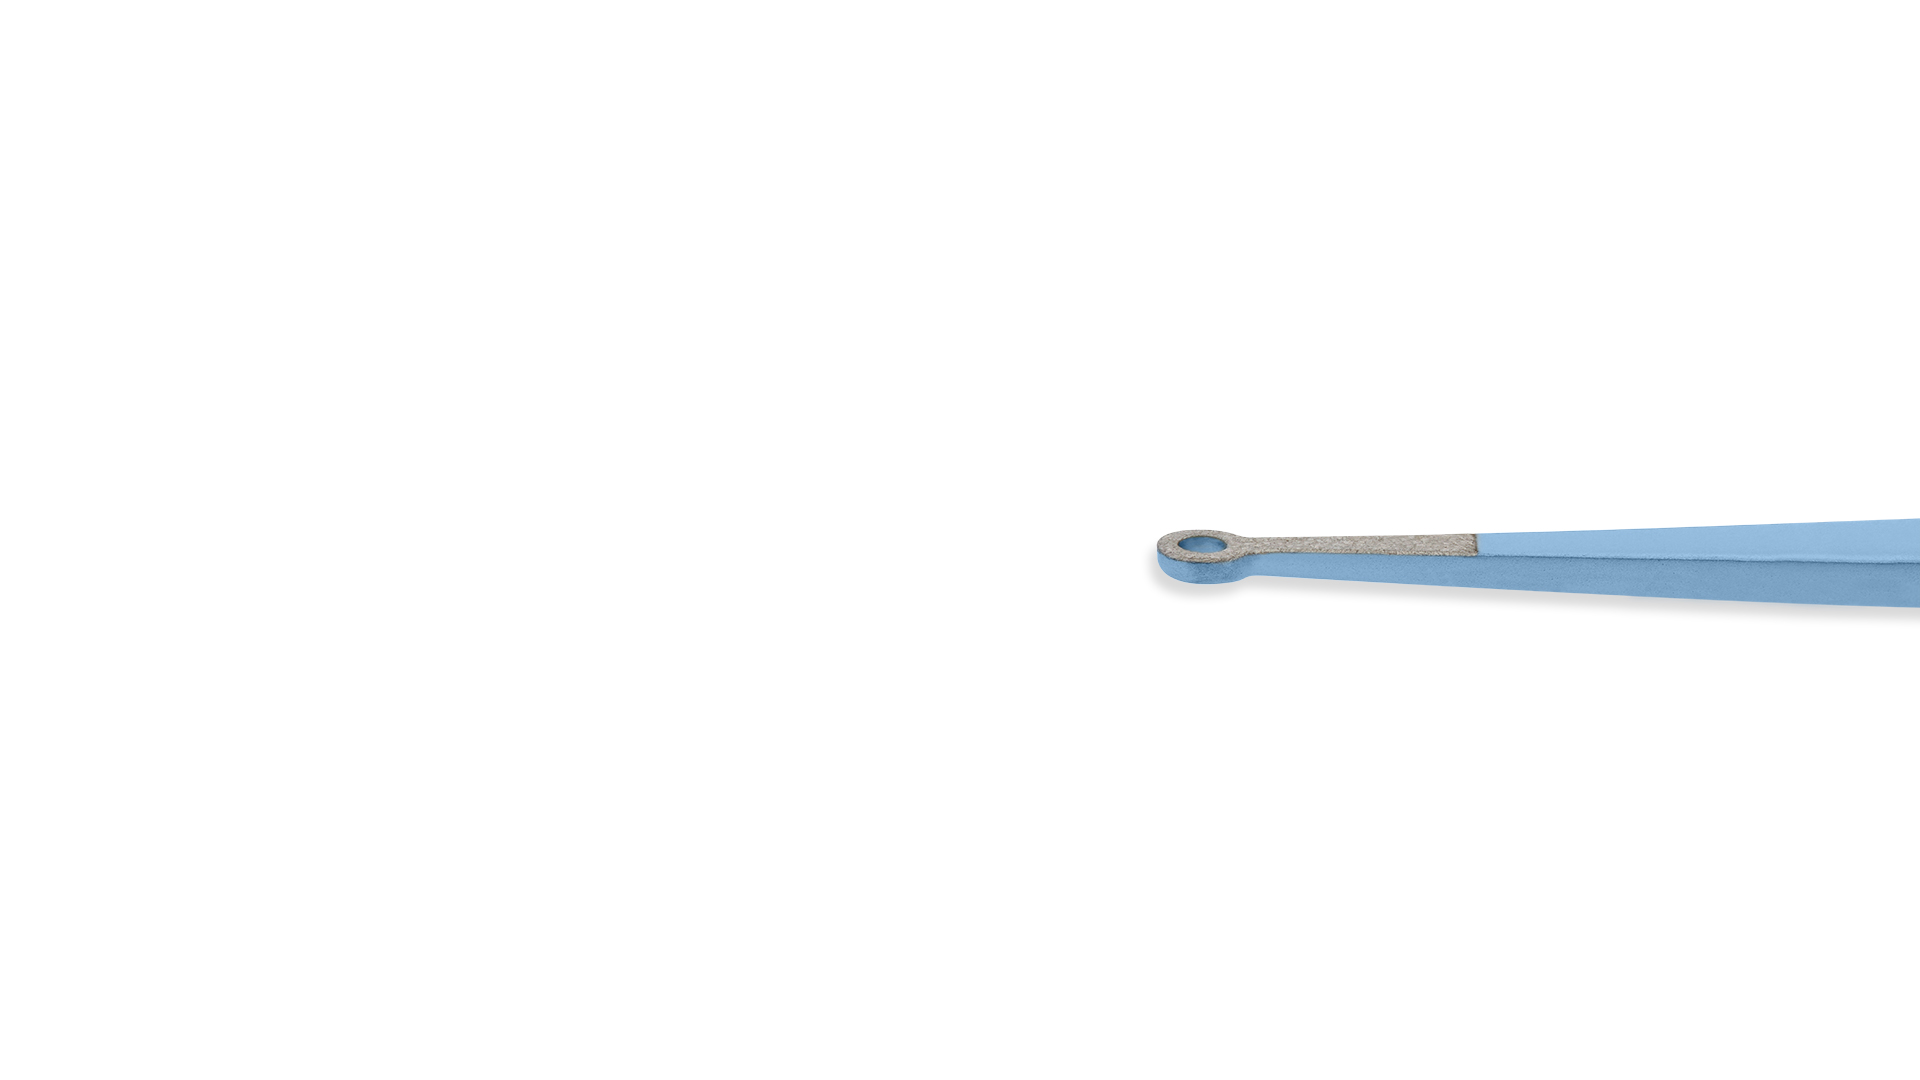 Ring tip Forceps - Straight 2mm TC coated rings